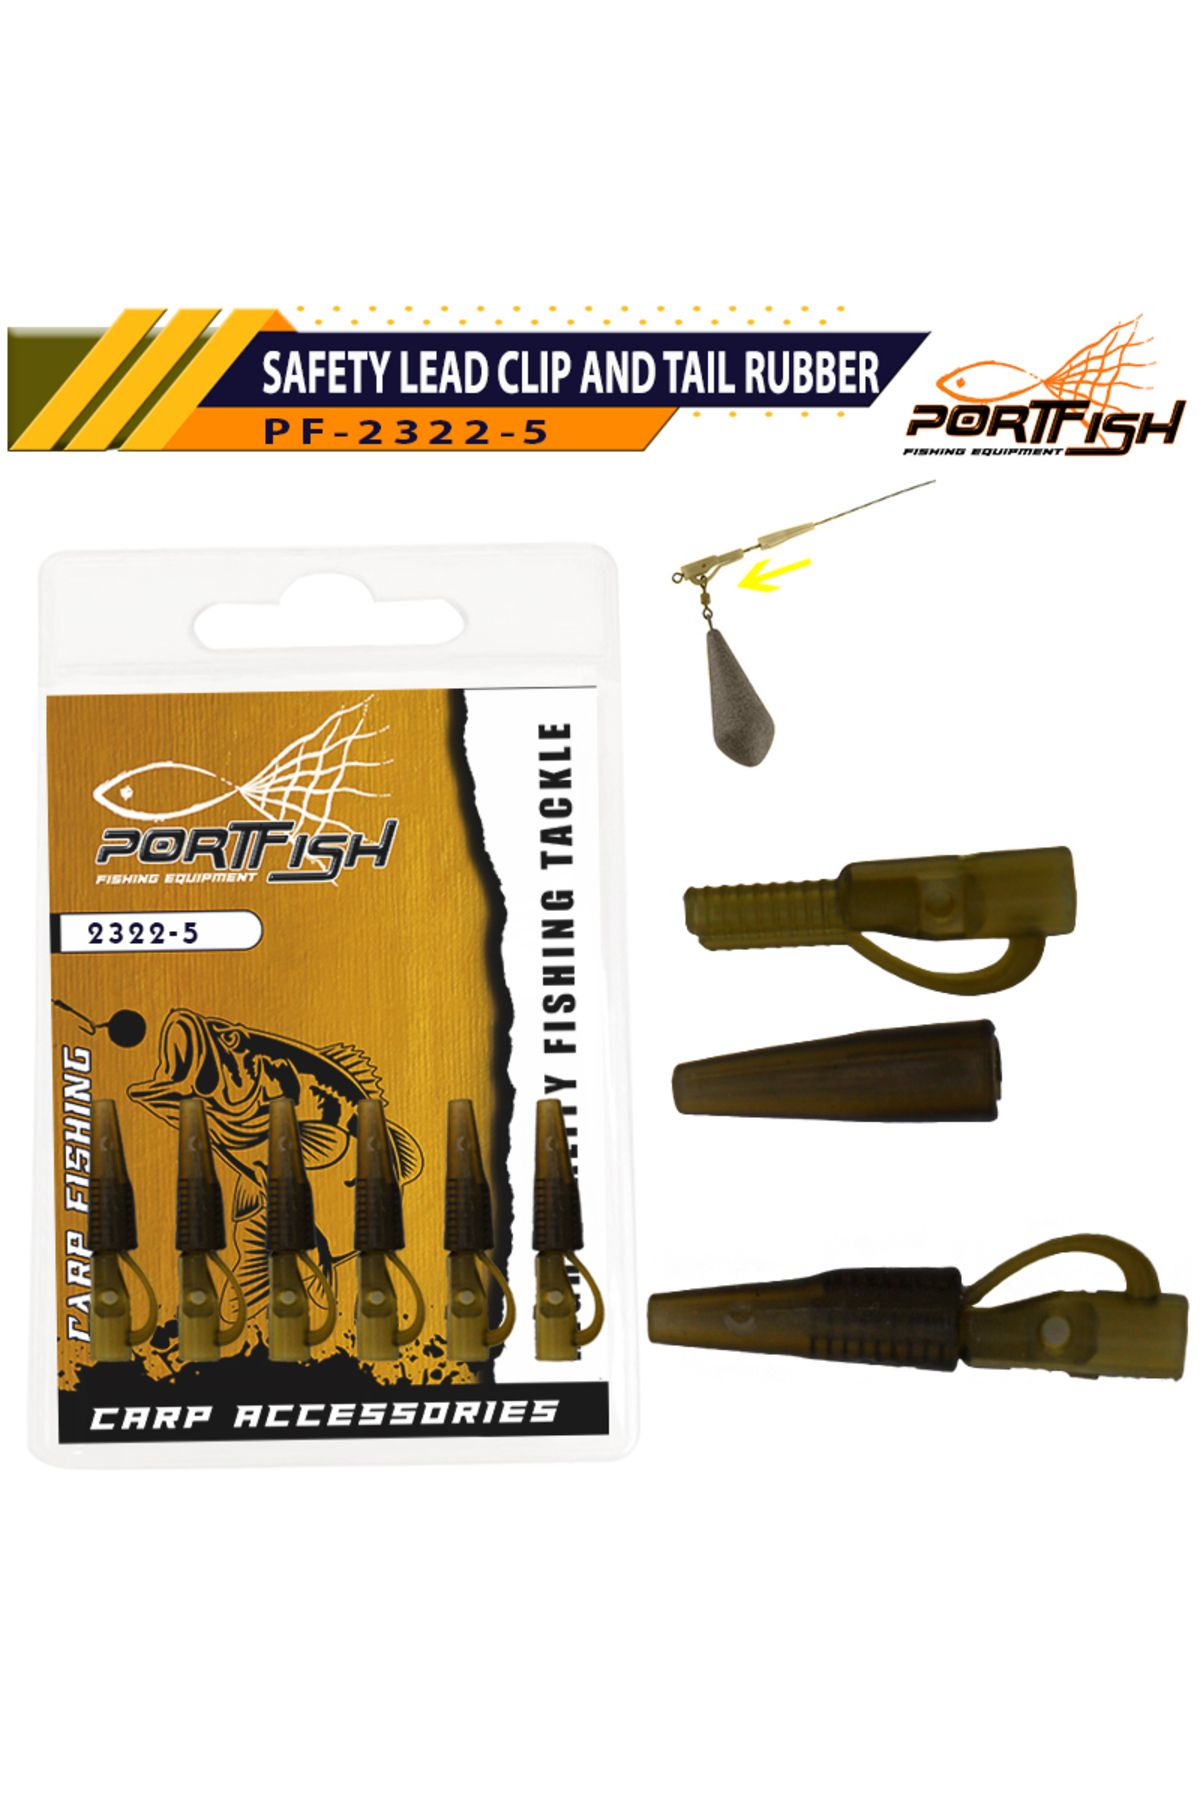 Port Fish Portfish 2322-5 Safety Lead Clip and Tail Rubber 6 Adet